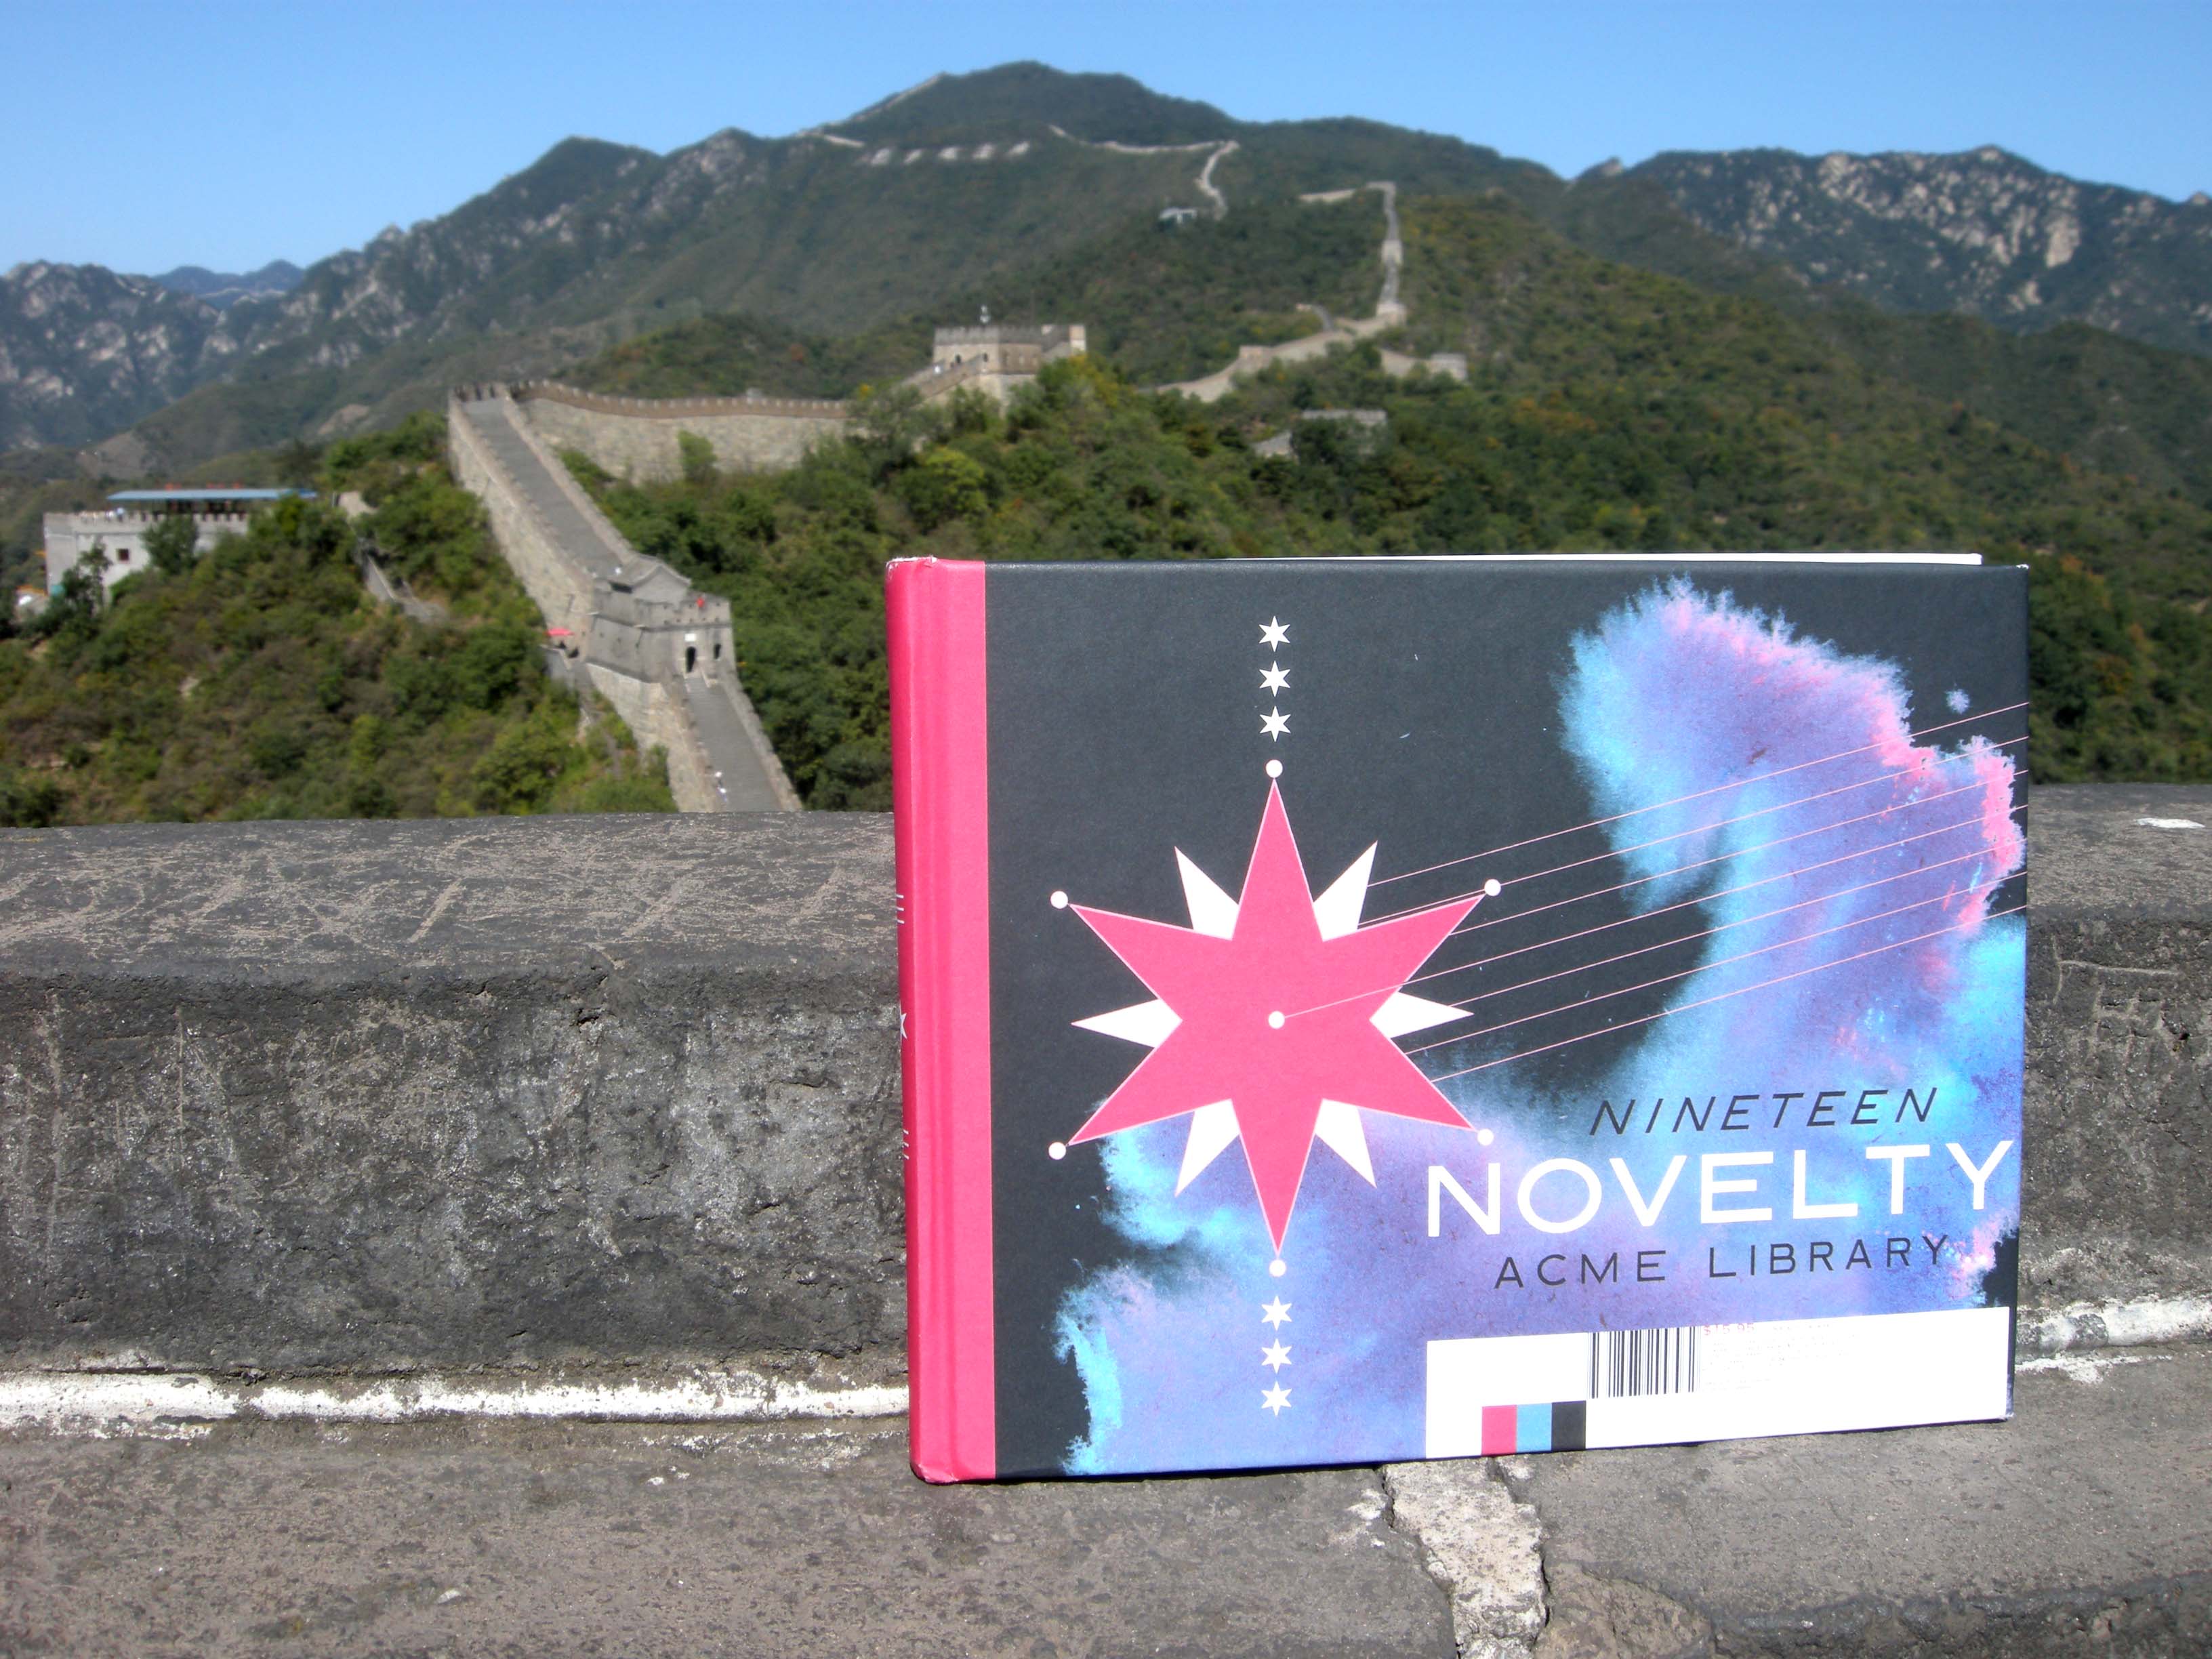 Acme Novelty Library Nineteen at the Great Wall 21 Sept 2009